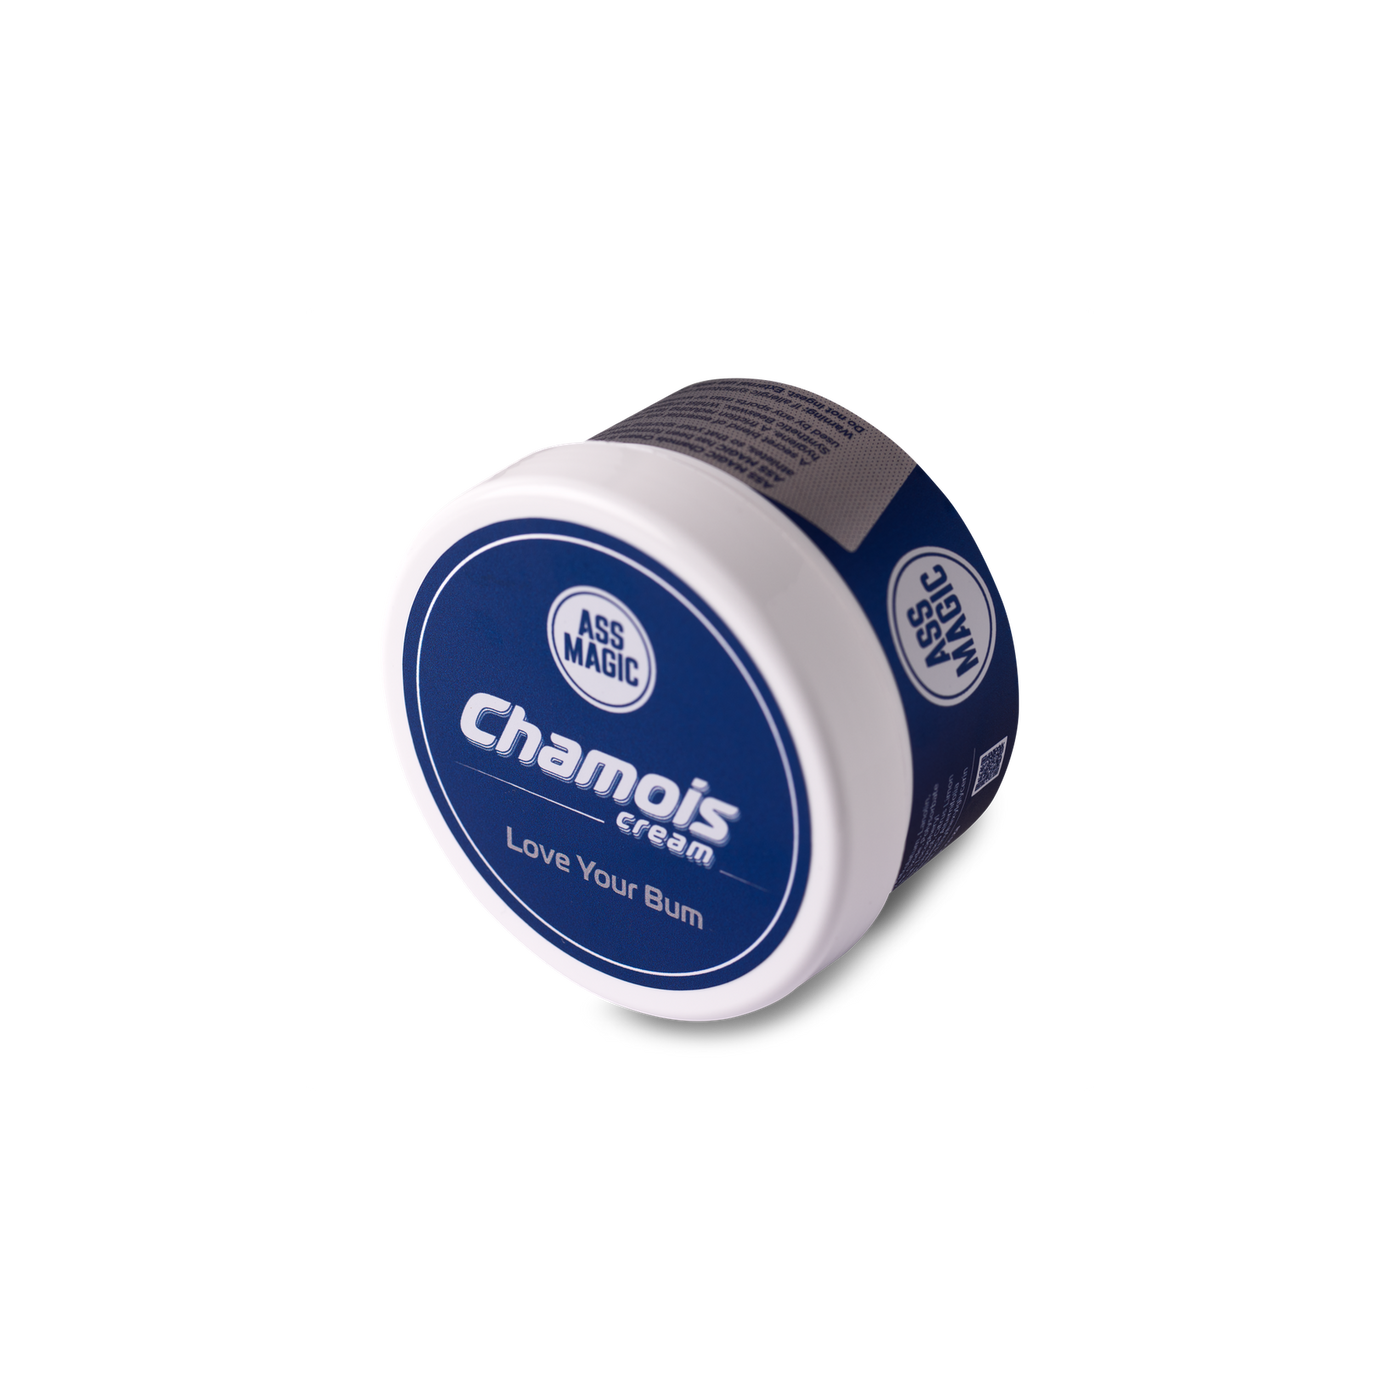 , ASS MAGIC Chamois Cream is the finest anti-chafe cream for your nether regions. ASS MAGIC has been formulated and field tested by industry leading experts and athletes, so that your sporting activities are done in comfort.